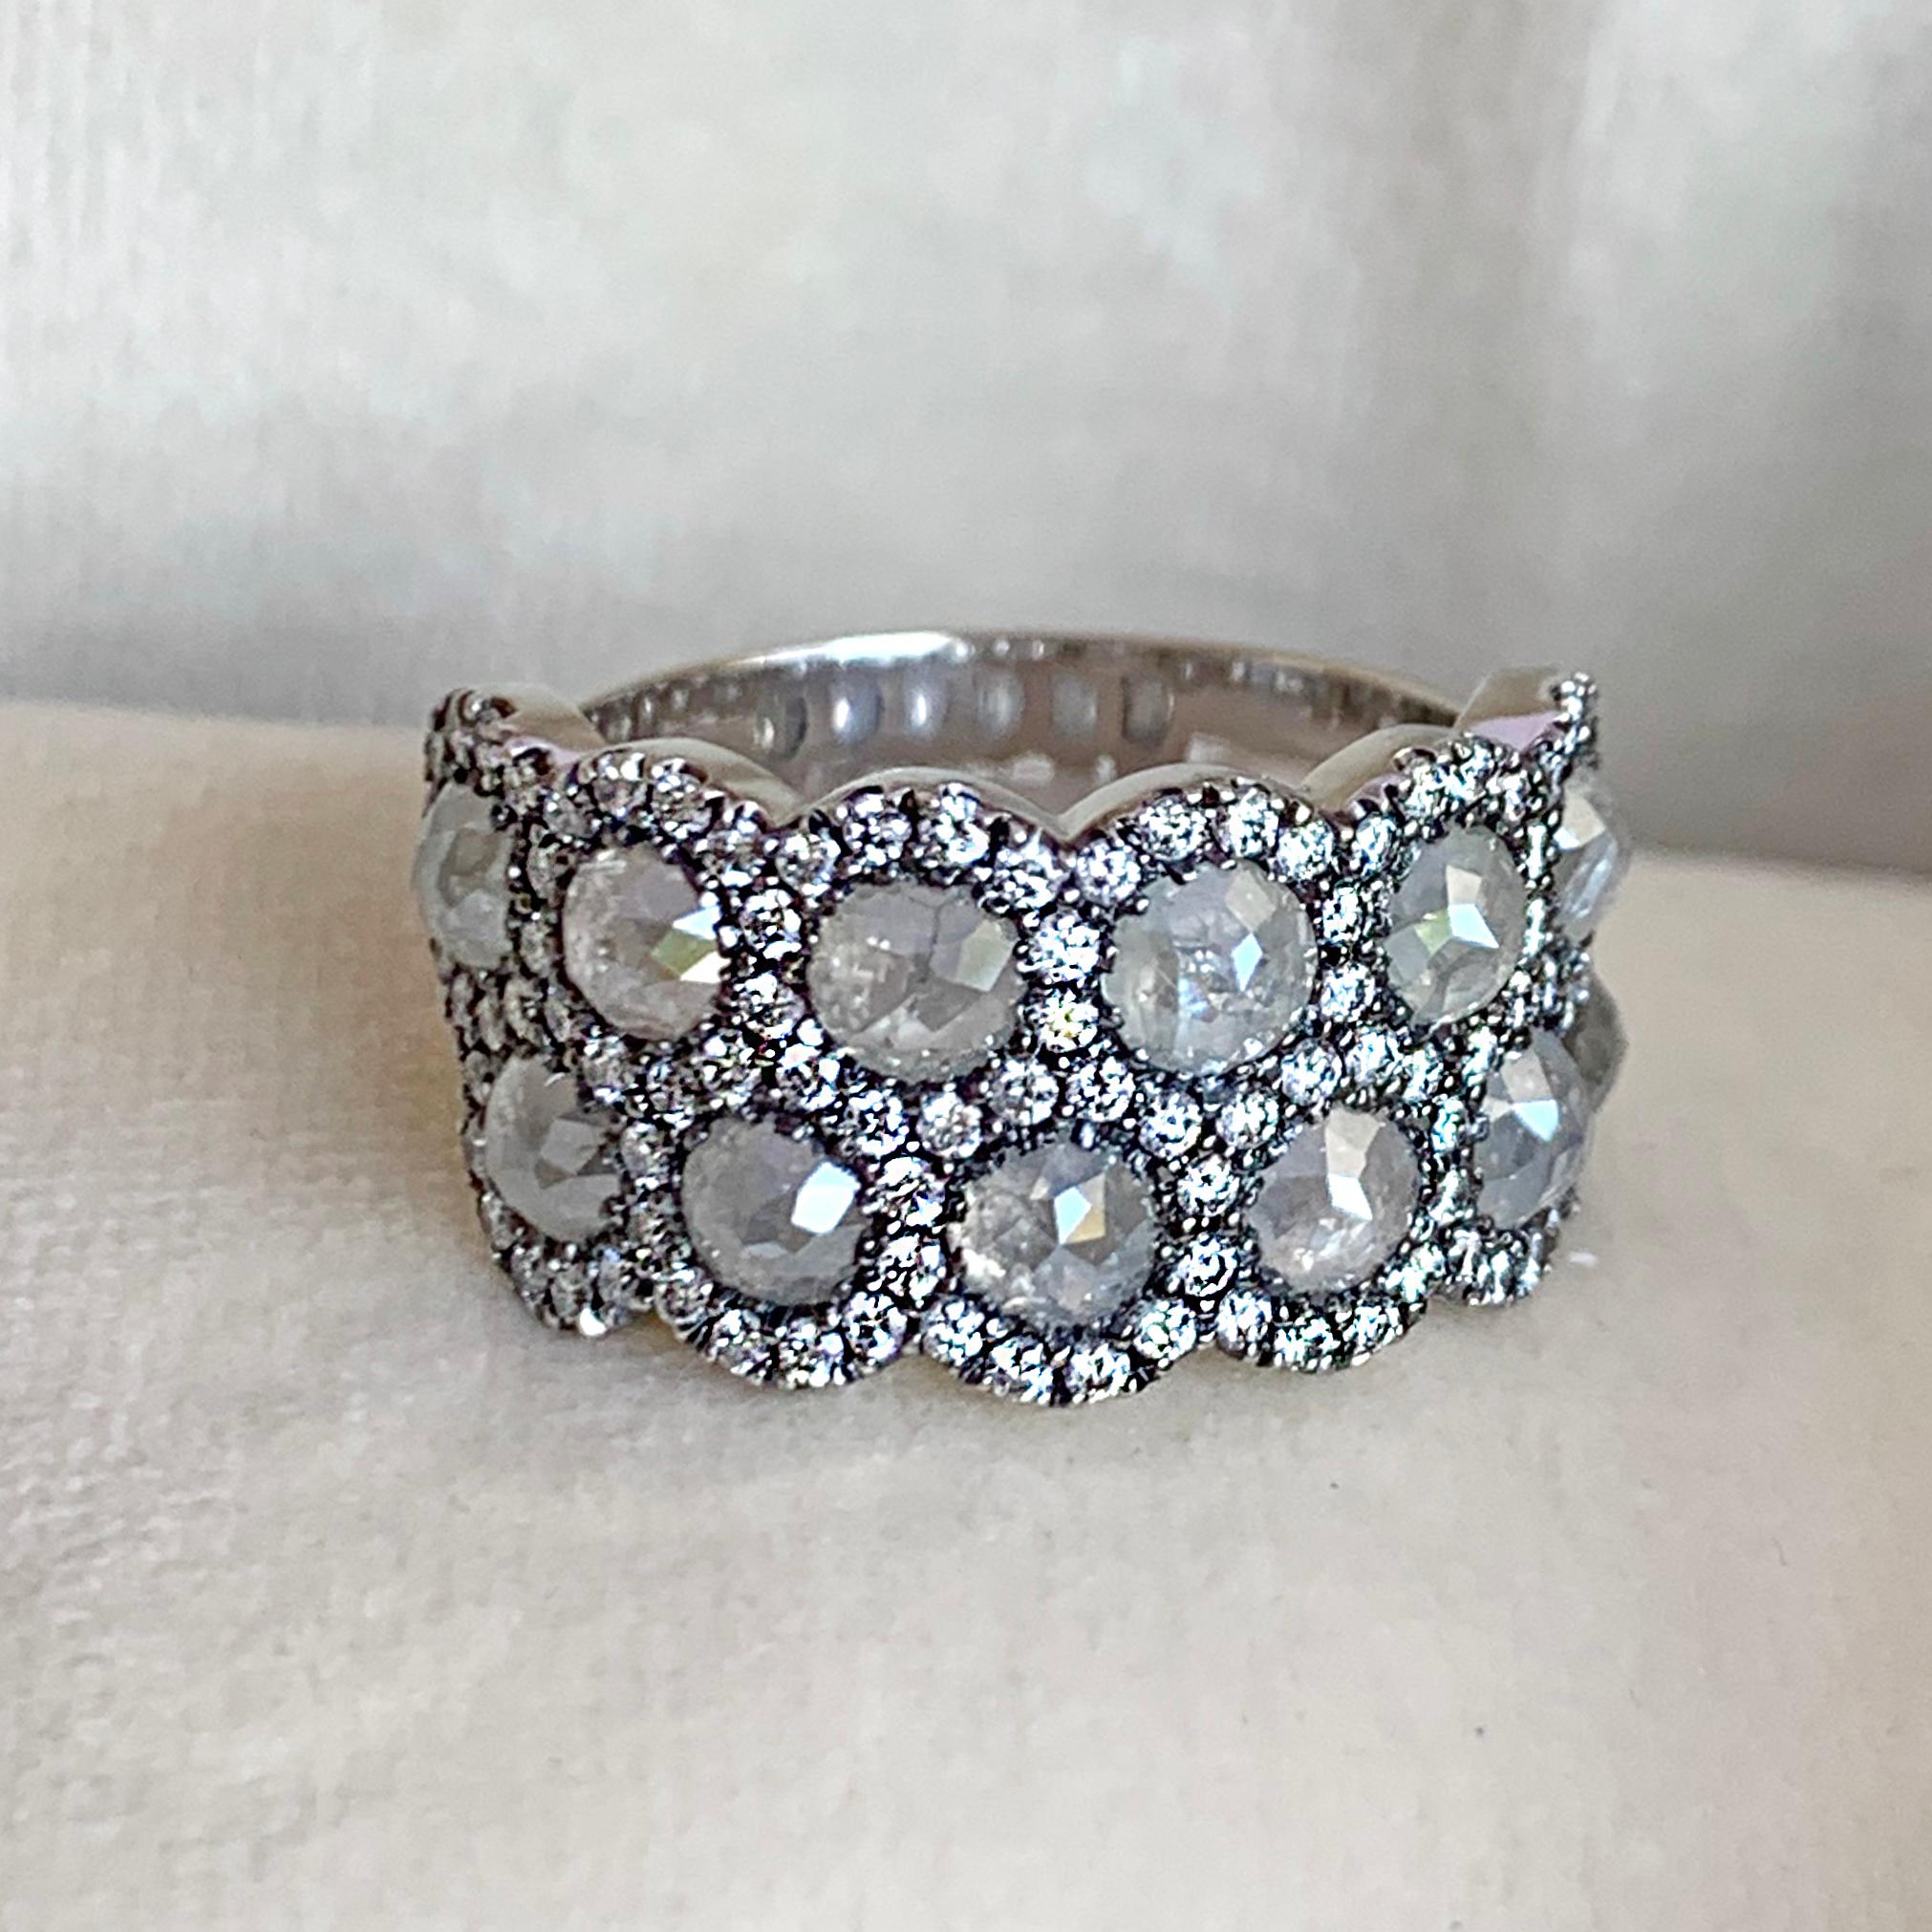 One of a kind Alliance ring handmade in Belgium in 2017 by jewellery artist Joke Quick, in 18K white gold 9 g. Set with 12 Icy rose-cut diamonds and 102 white DEGVVS brilliant-cut diamonds. Total carat diamonds: 5,42 carat. Size EU 54  US 6 3/4 .